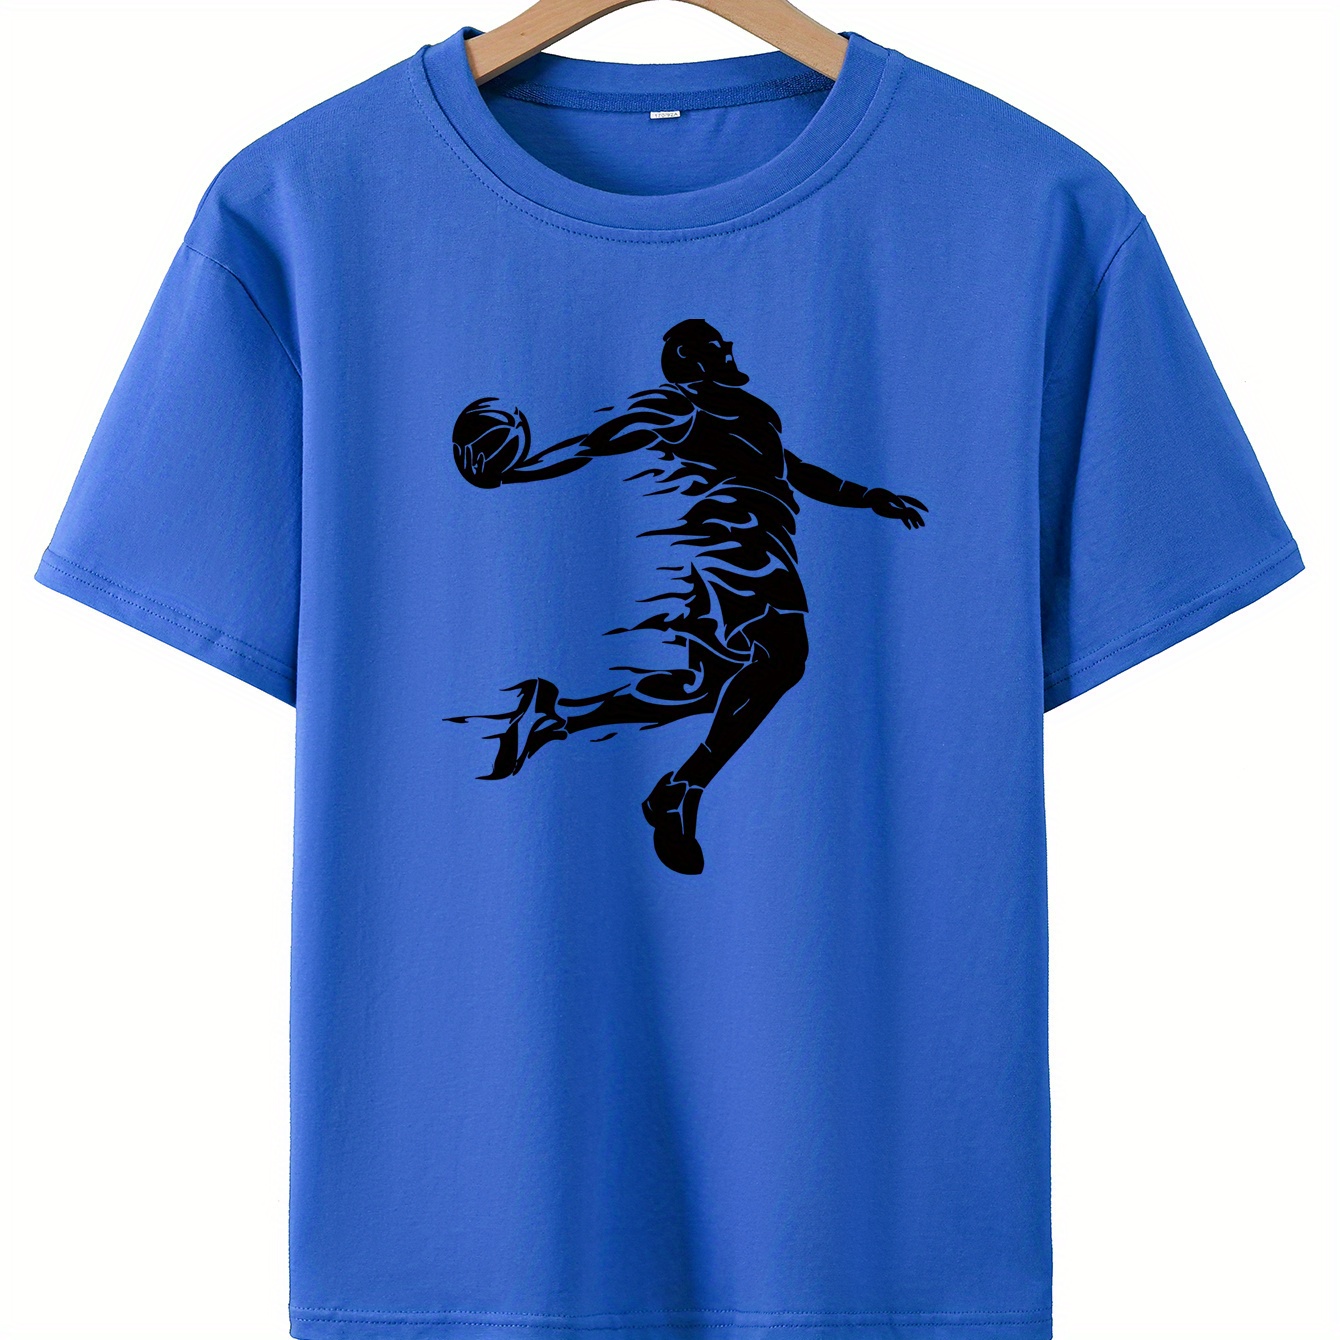 

Boys Basketball Player Print Casual Short Sleeve T-shirt, Cool Comfy Loose Fitting Versatile Trendy Tee Boys Summer Outfits Clothes